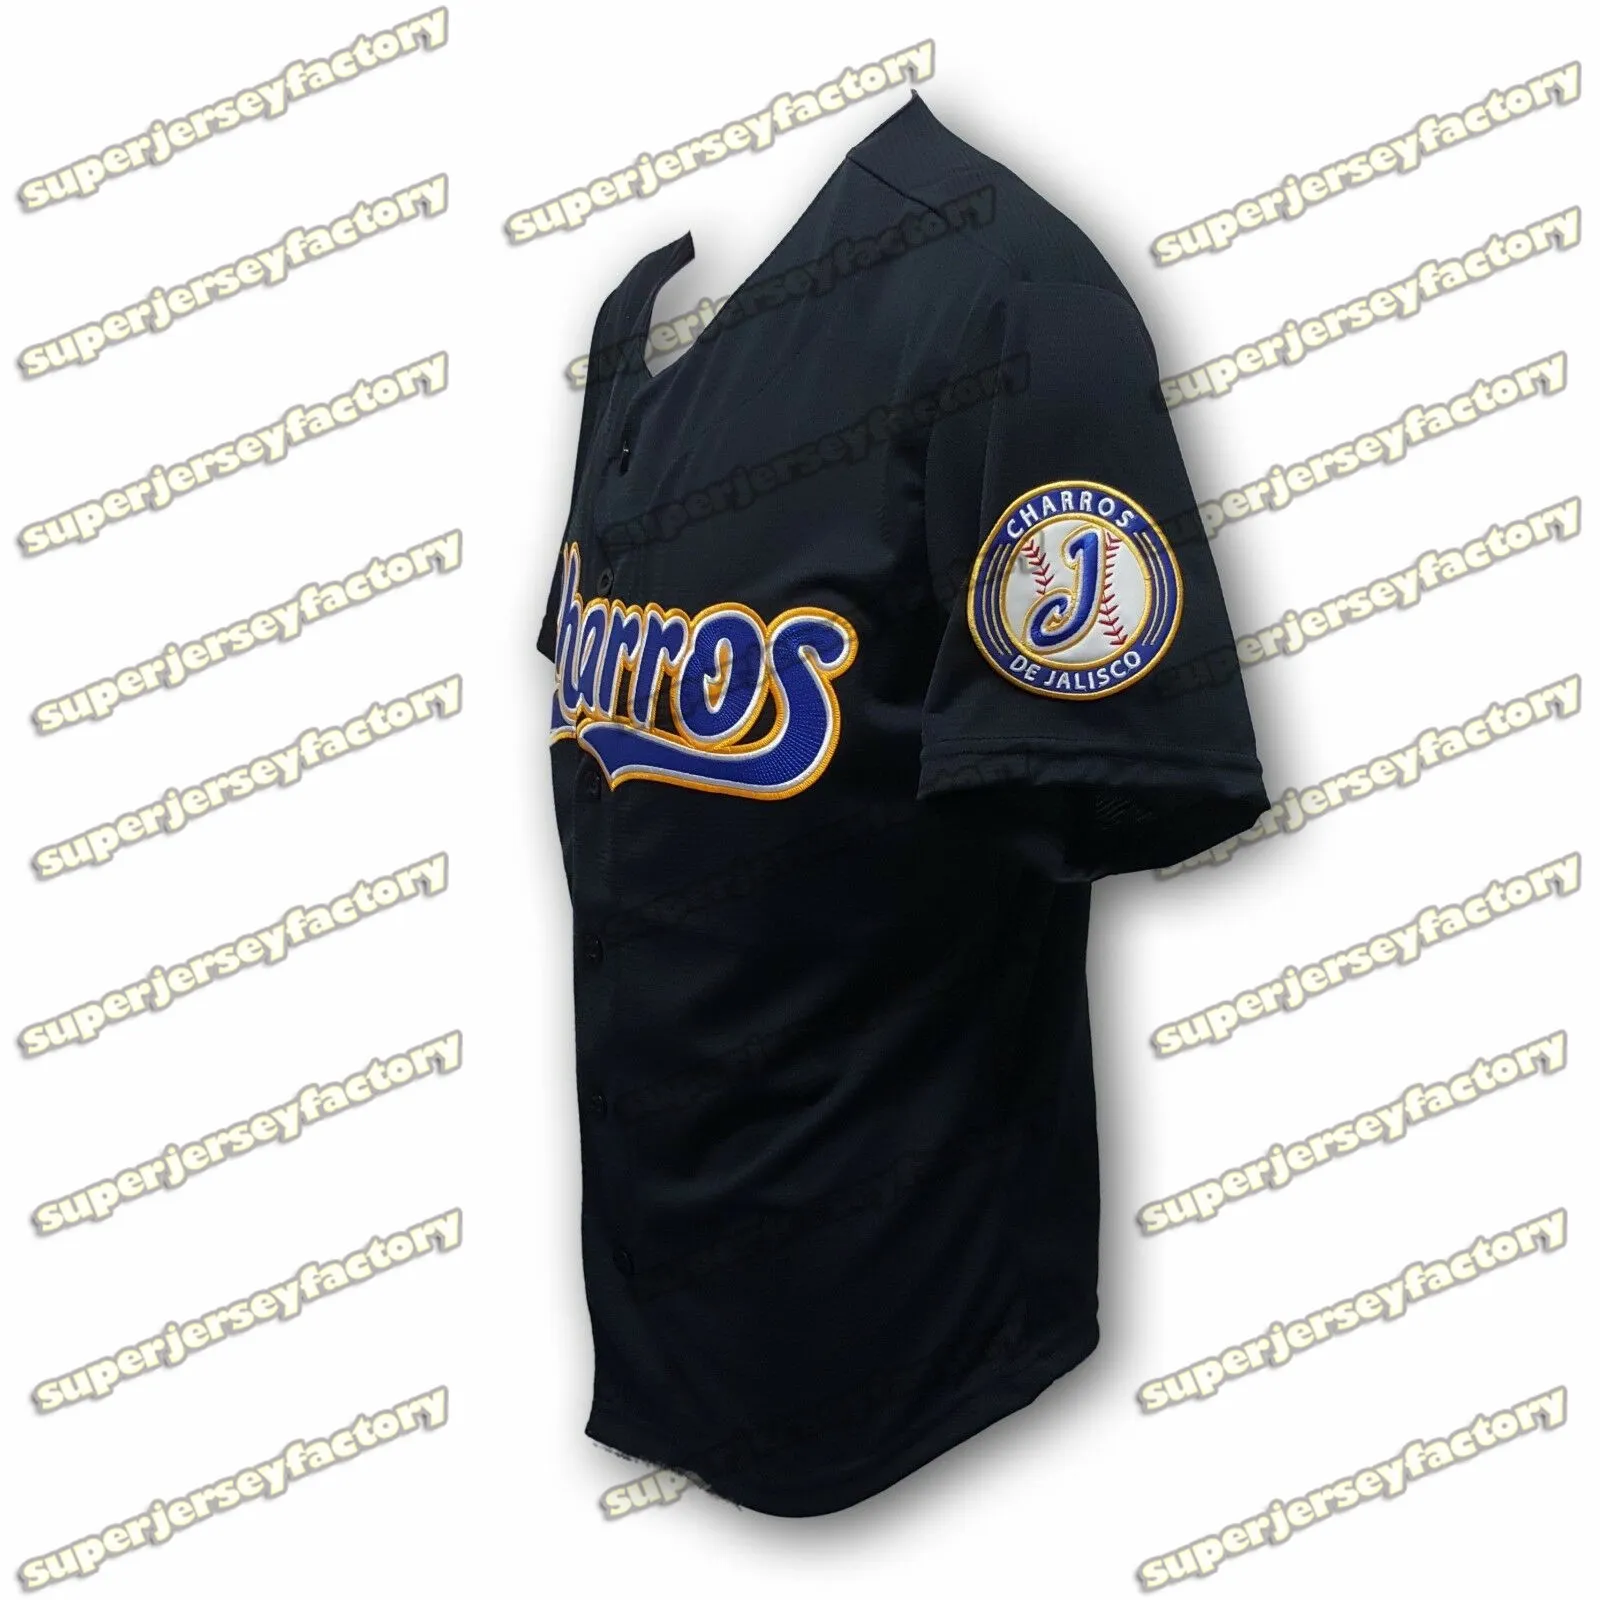 Charros De Jalisco Baseball Jersey Made in Mexico Stitched Stitched 100% Polyester-Soft Material-Black blue jerseys